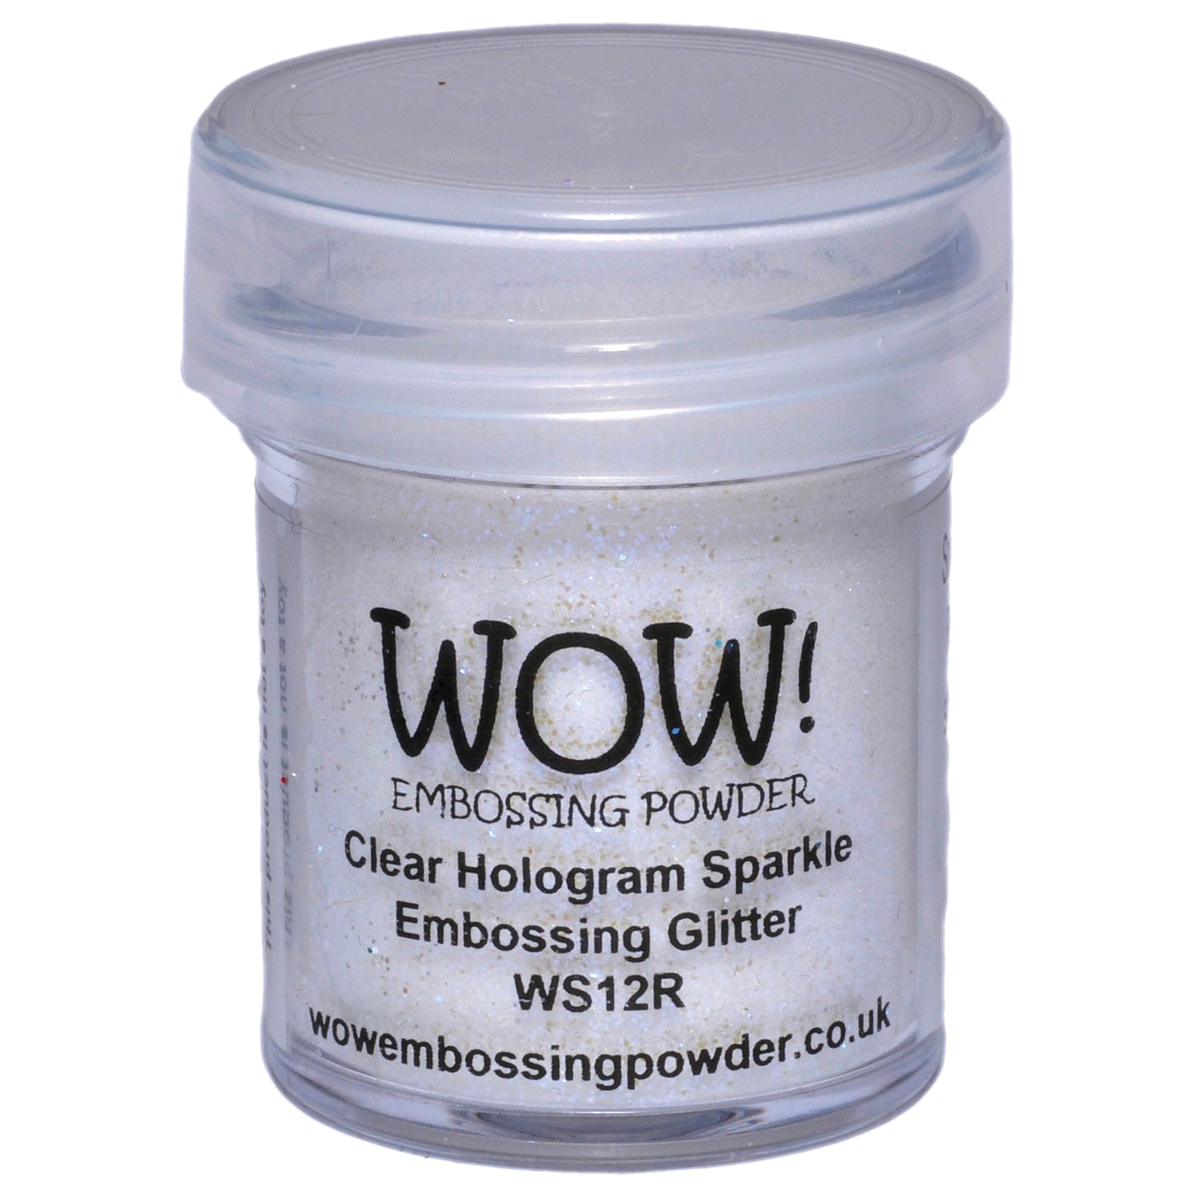 Wow Embossing powder - Clear Hologram Sparkle